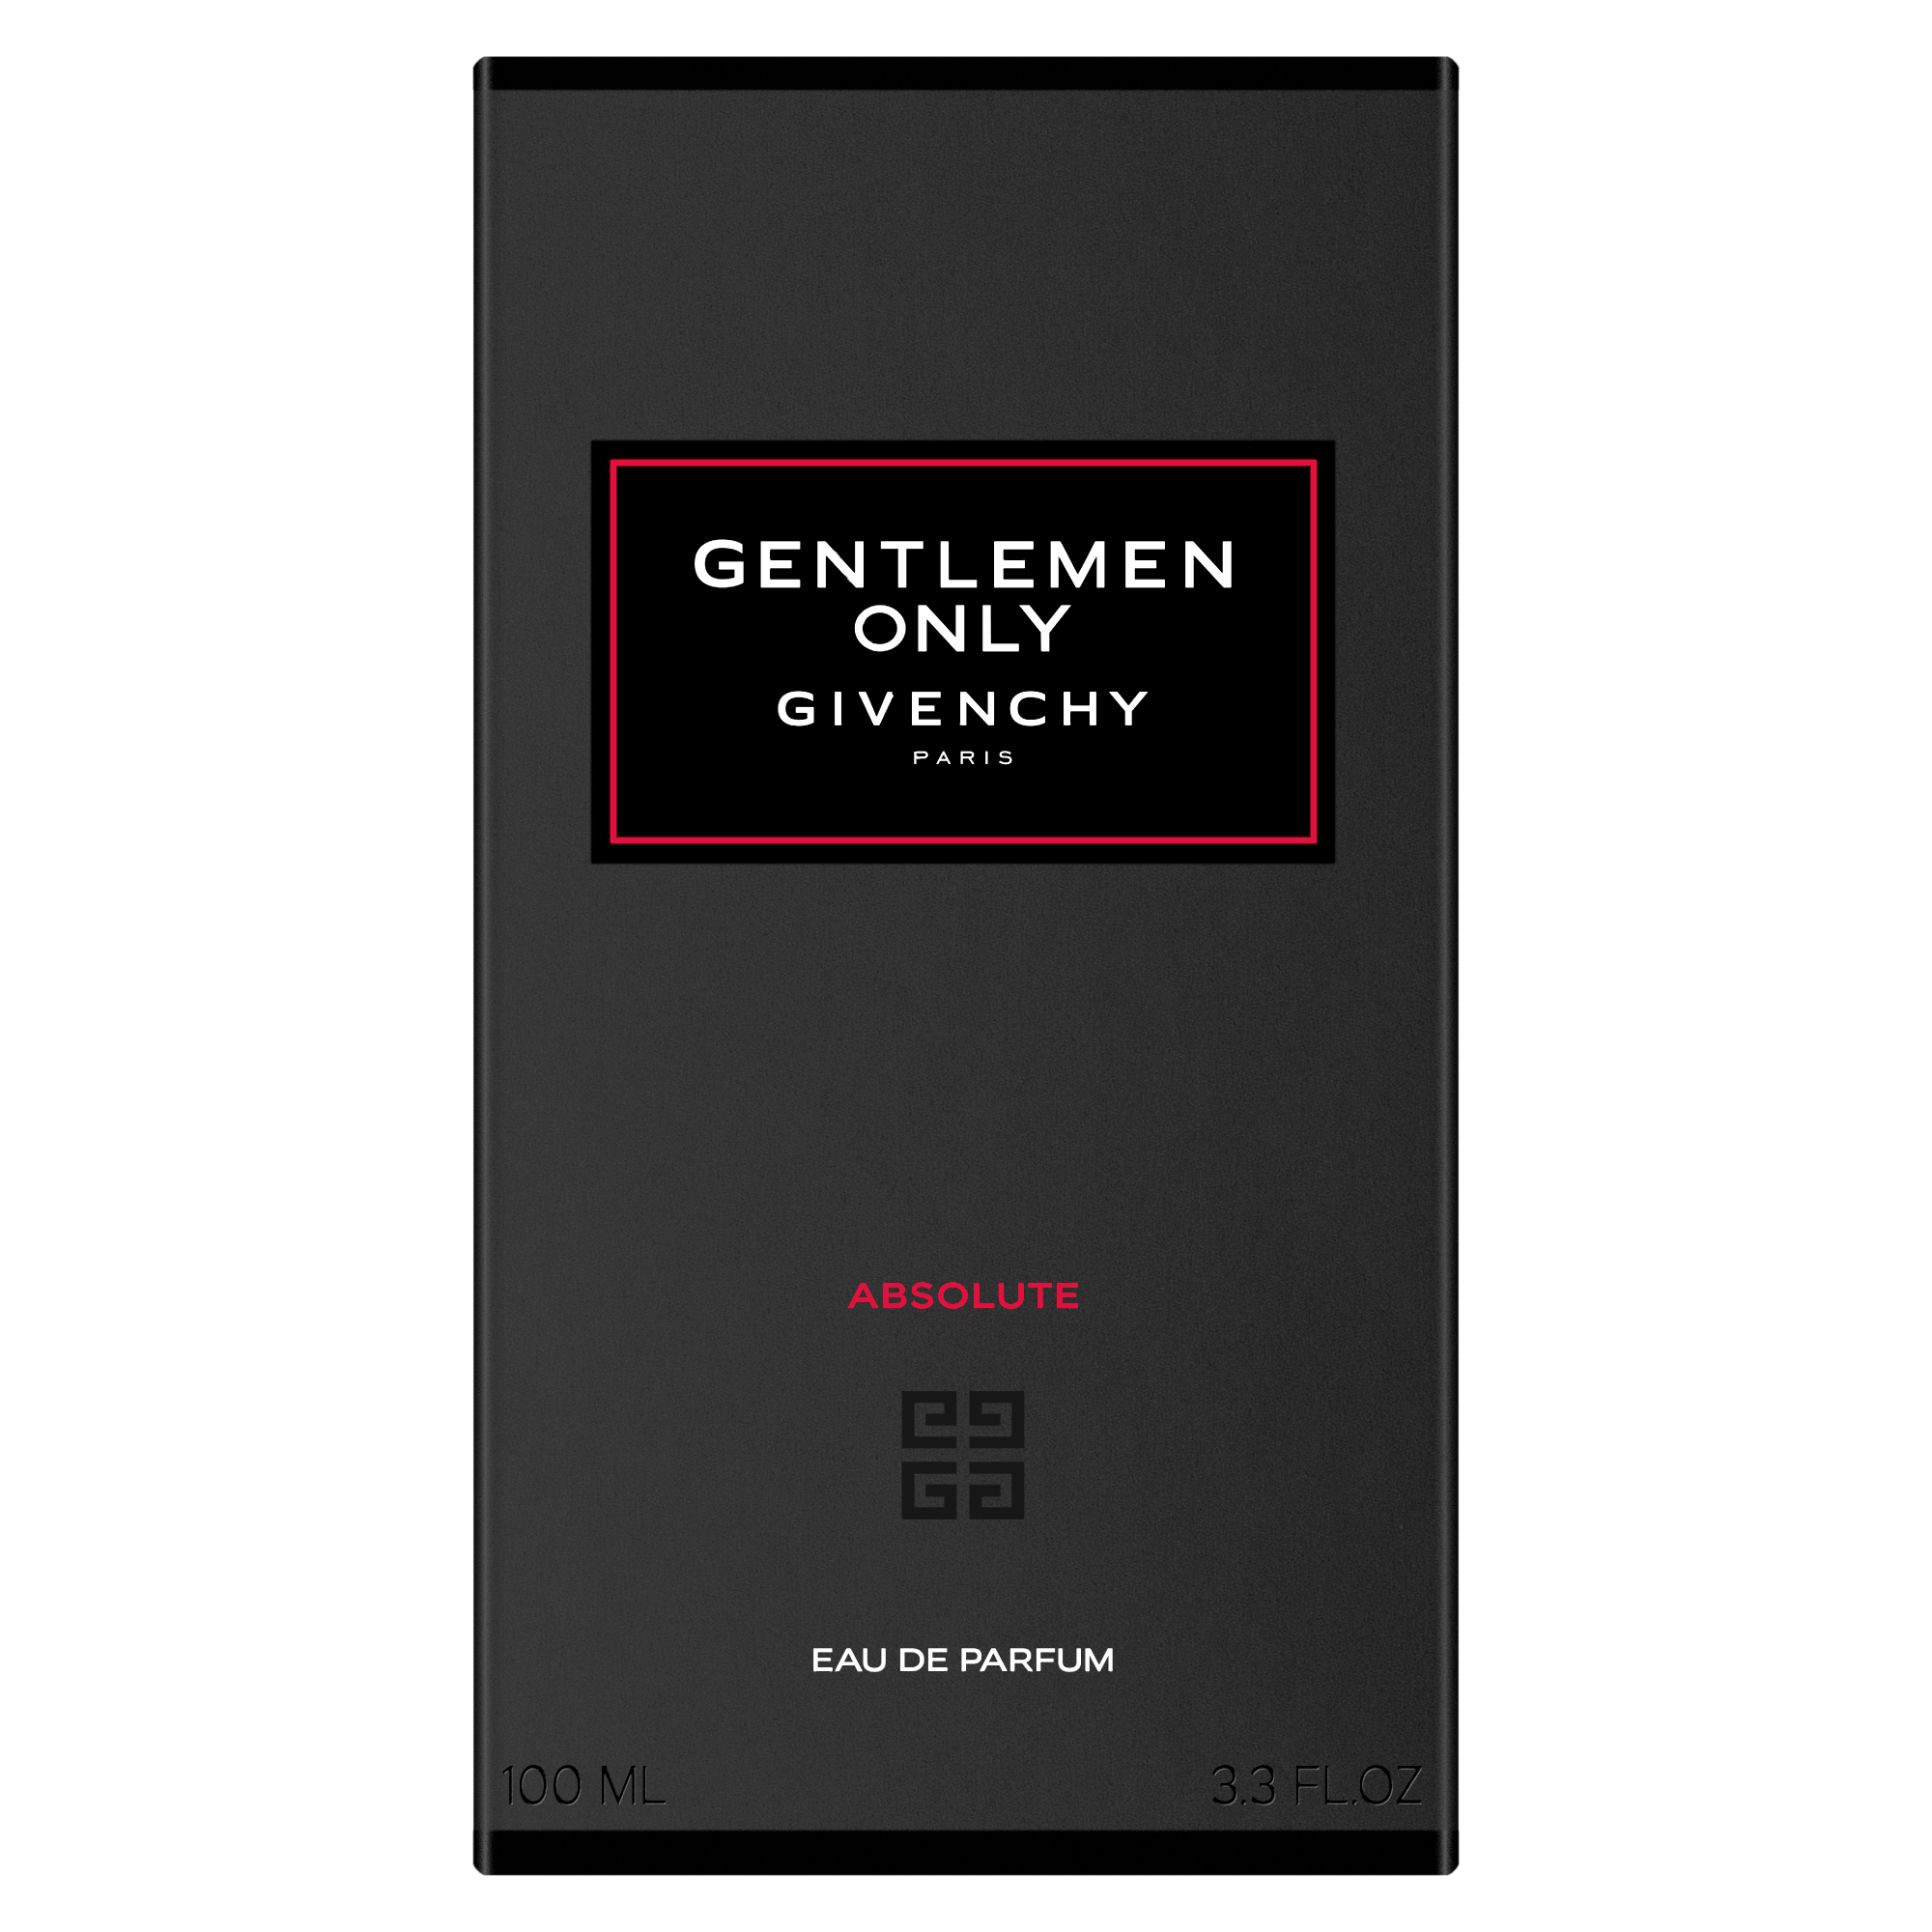 Only absolute. Givenchy only absolute. Givenchy Gentlemen only absolute,100ml. Живанши Абсолют женские. Givenchy absolutely.